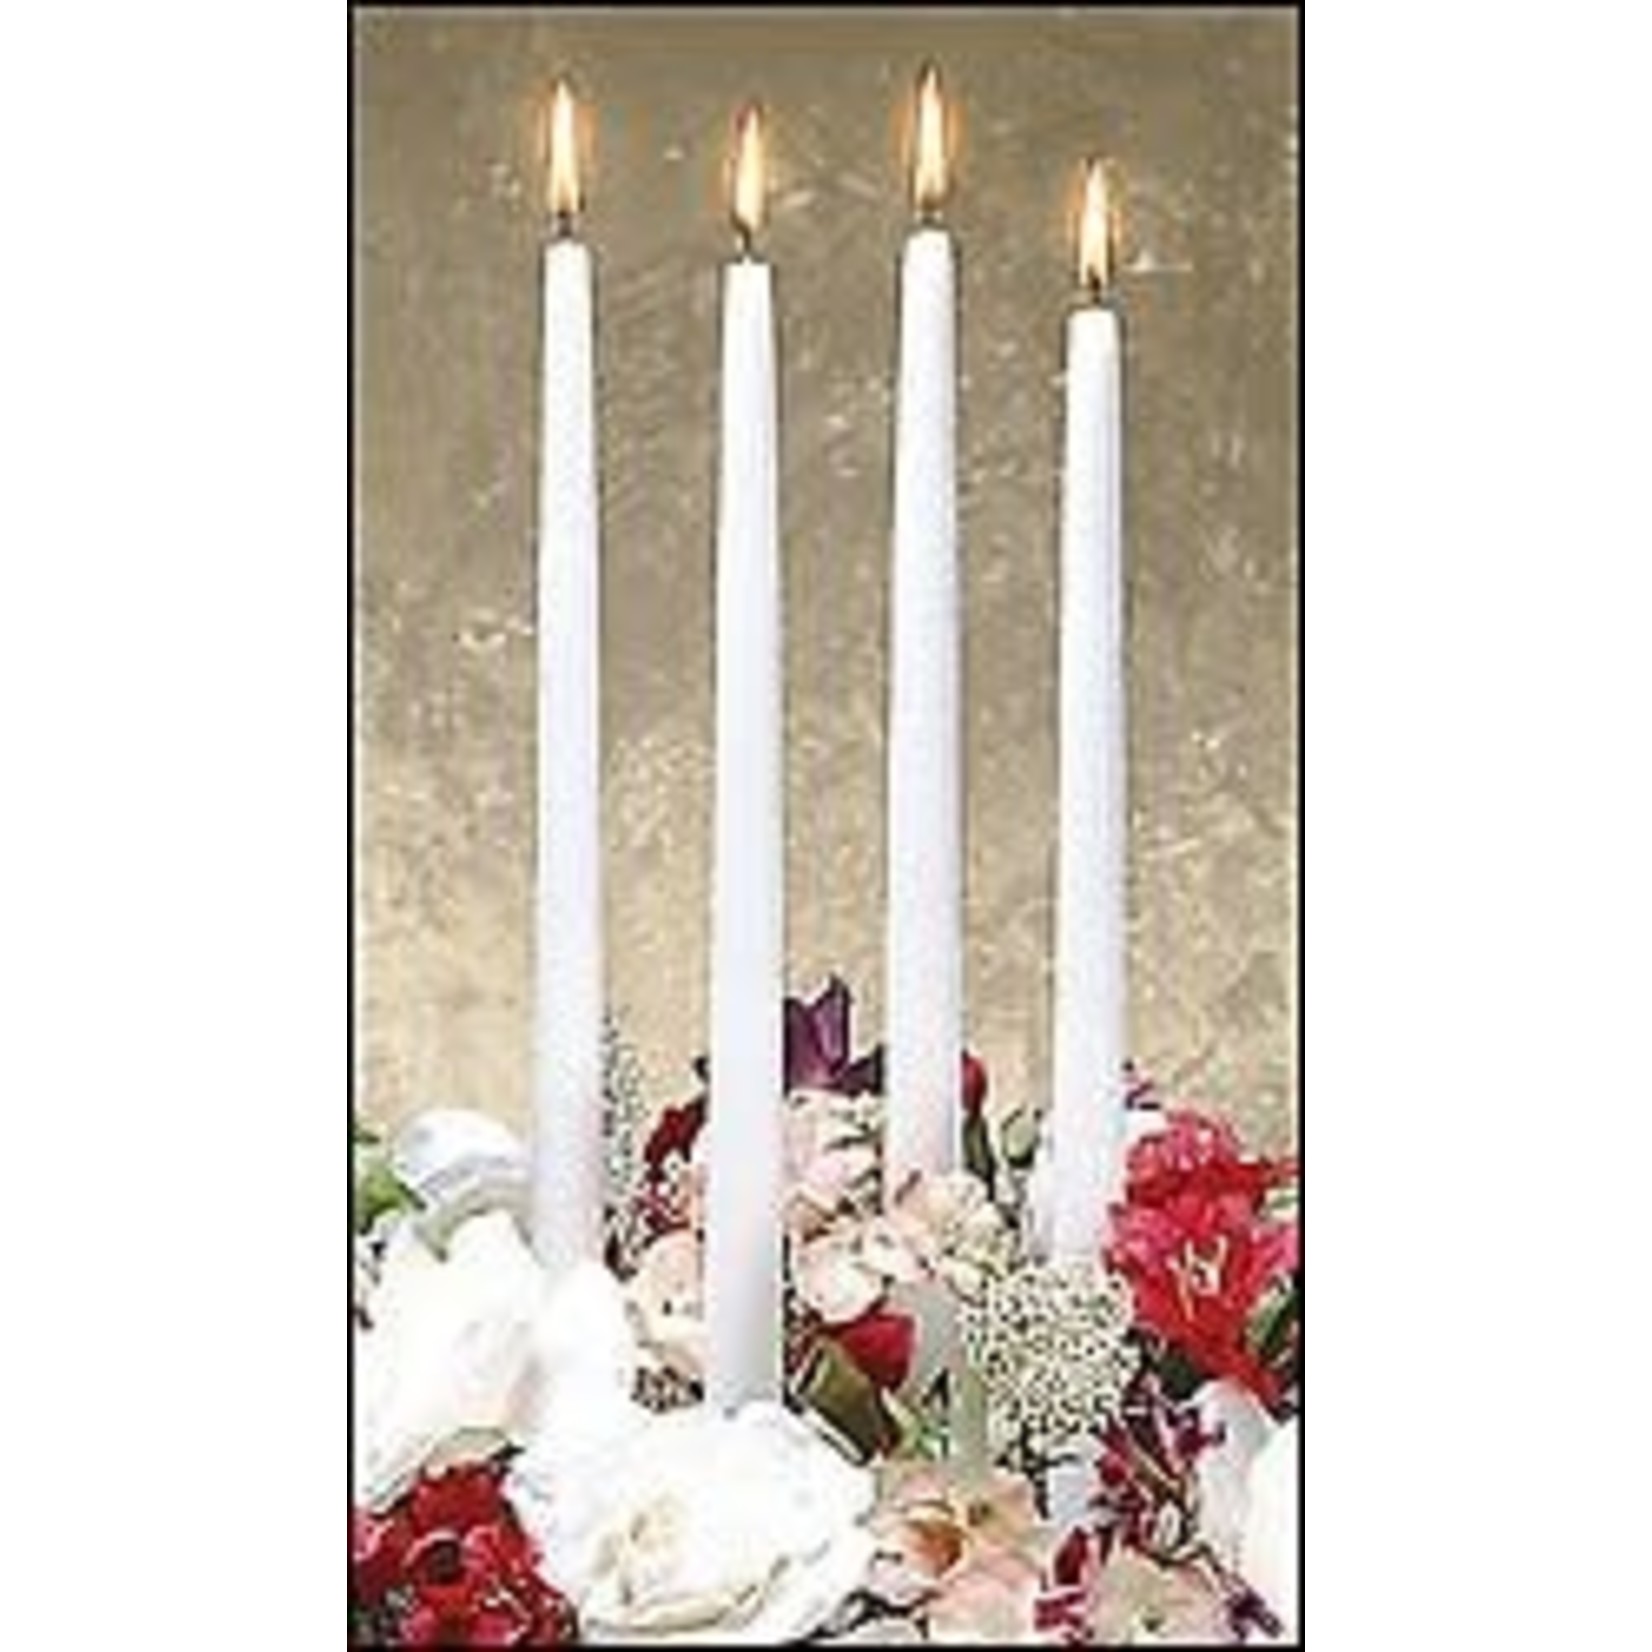 White Taper Candle 10"